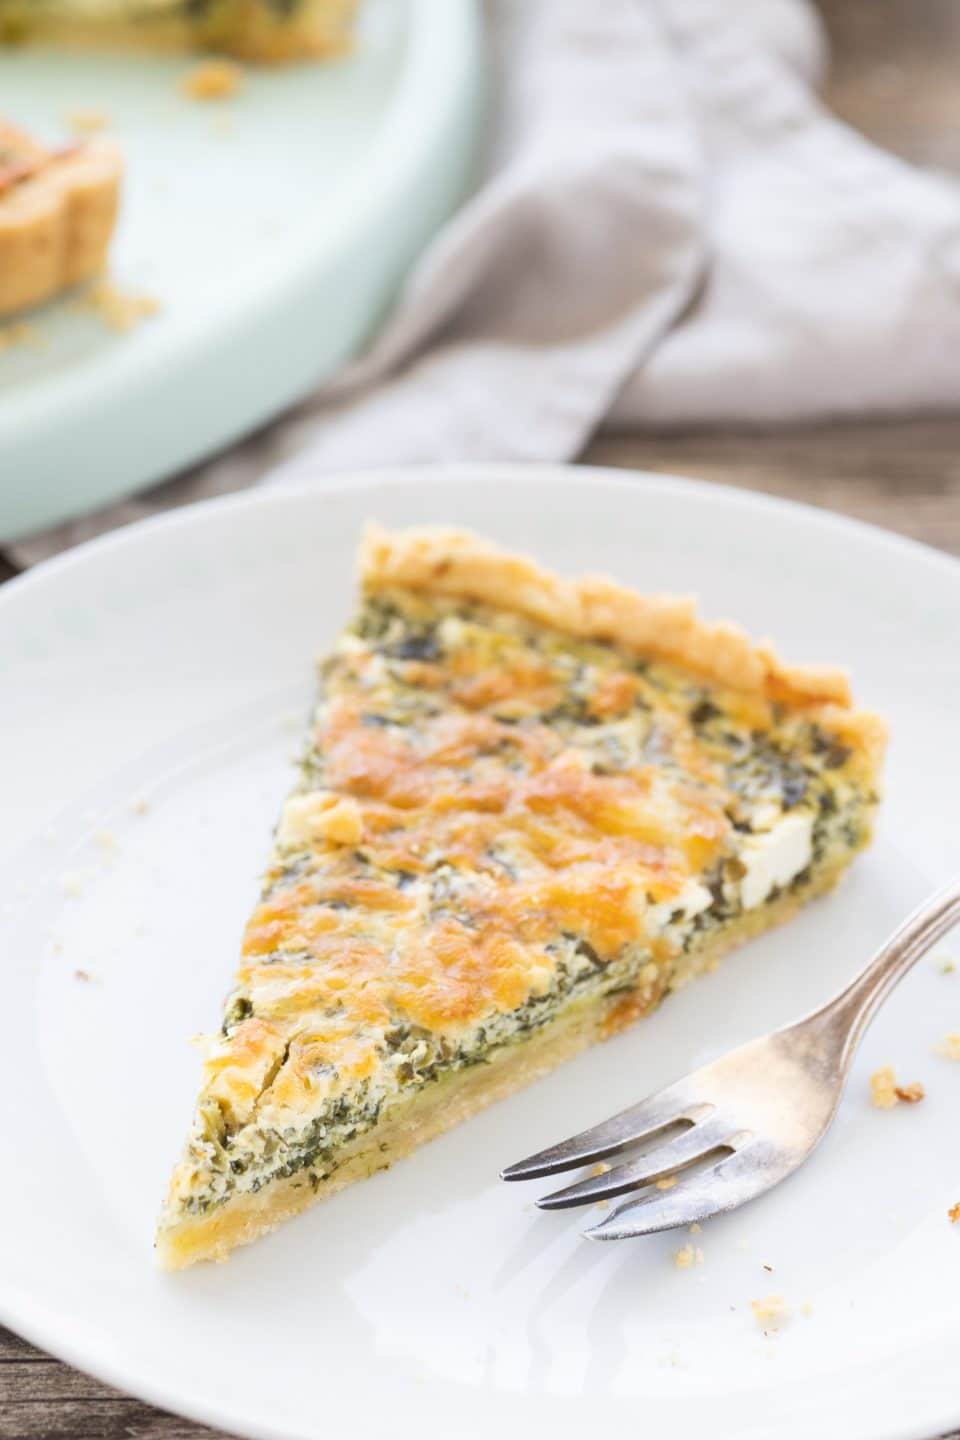 Spinach Quiche with Feta Cheese | Baking for Happiness